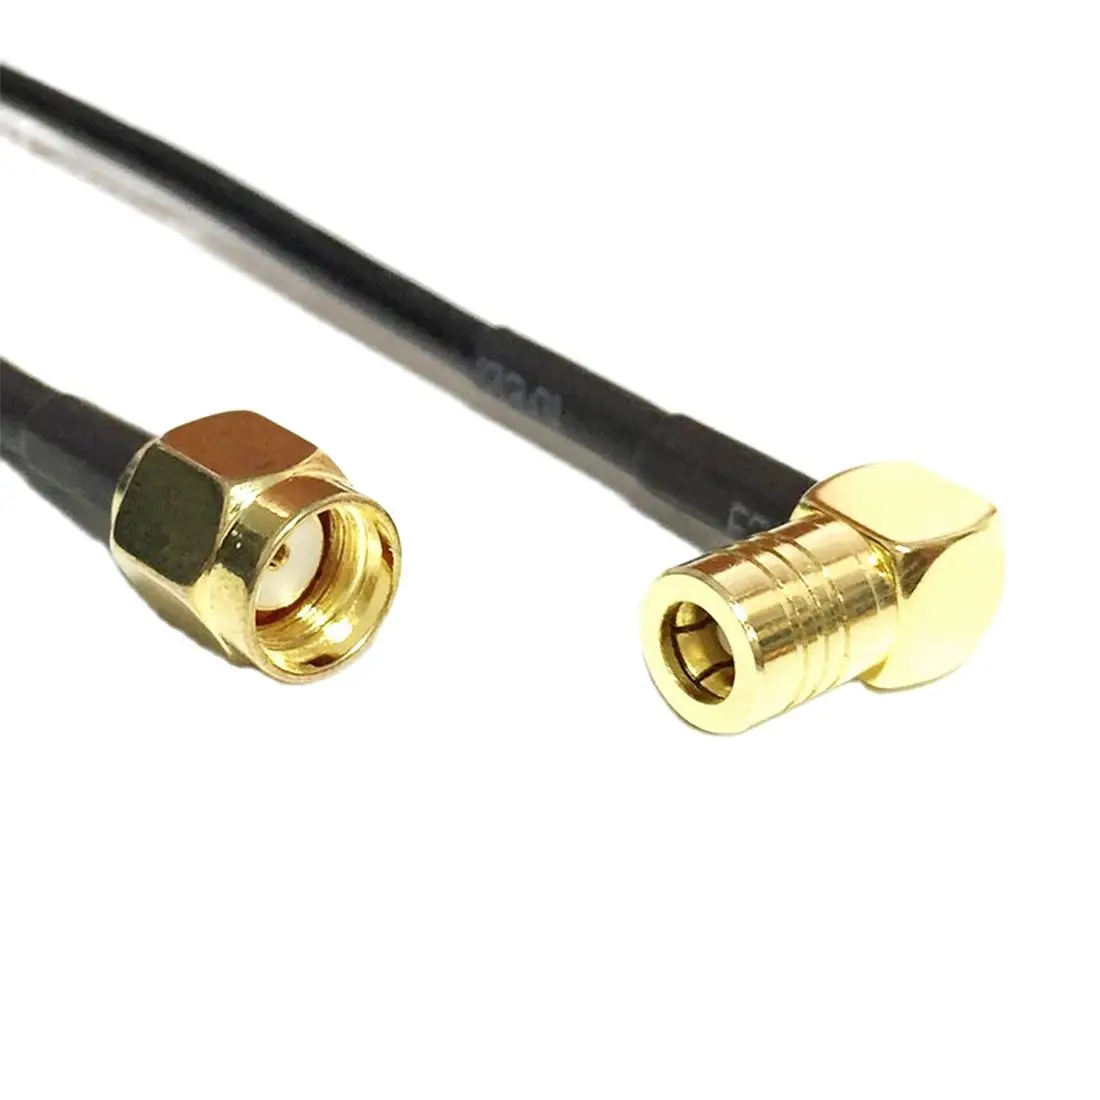 New Modem Coaxial Cable RP-SMA Male Plug Switch SMB Female Jack Right Angle Connector RG174 Cable 20CM 8